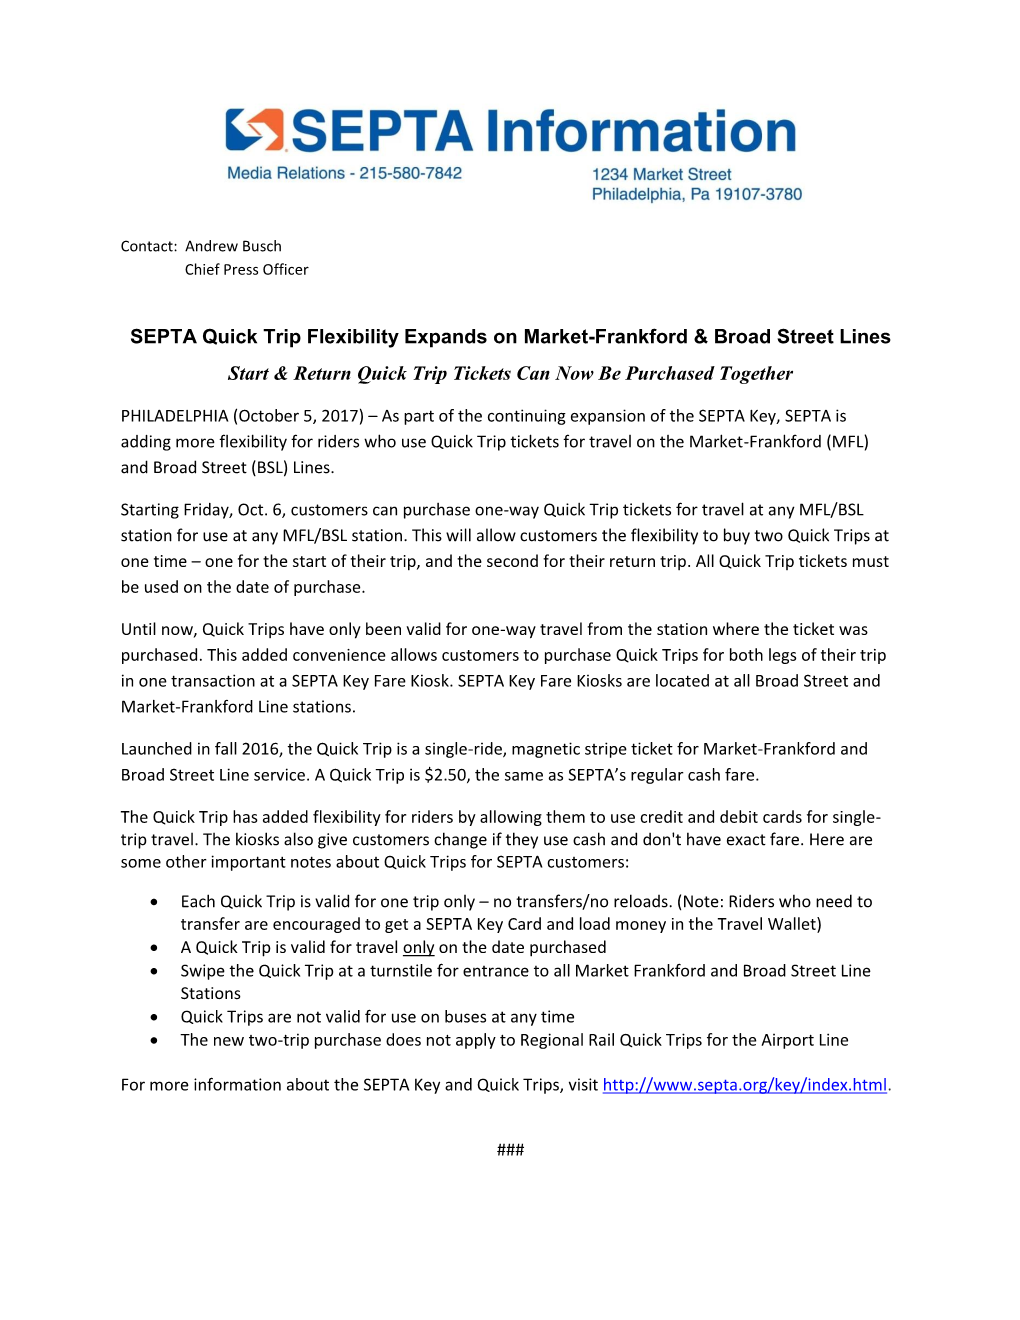 SEPTA Quick Trip Flexibility Expands on Market-Frankford & Broad